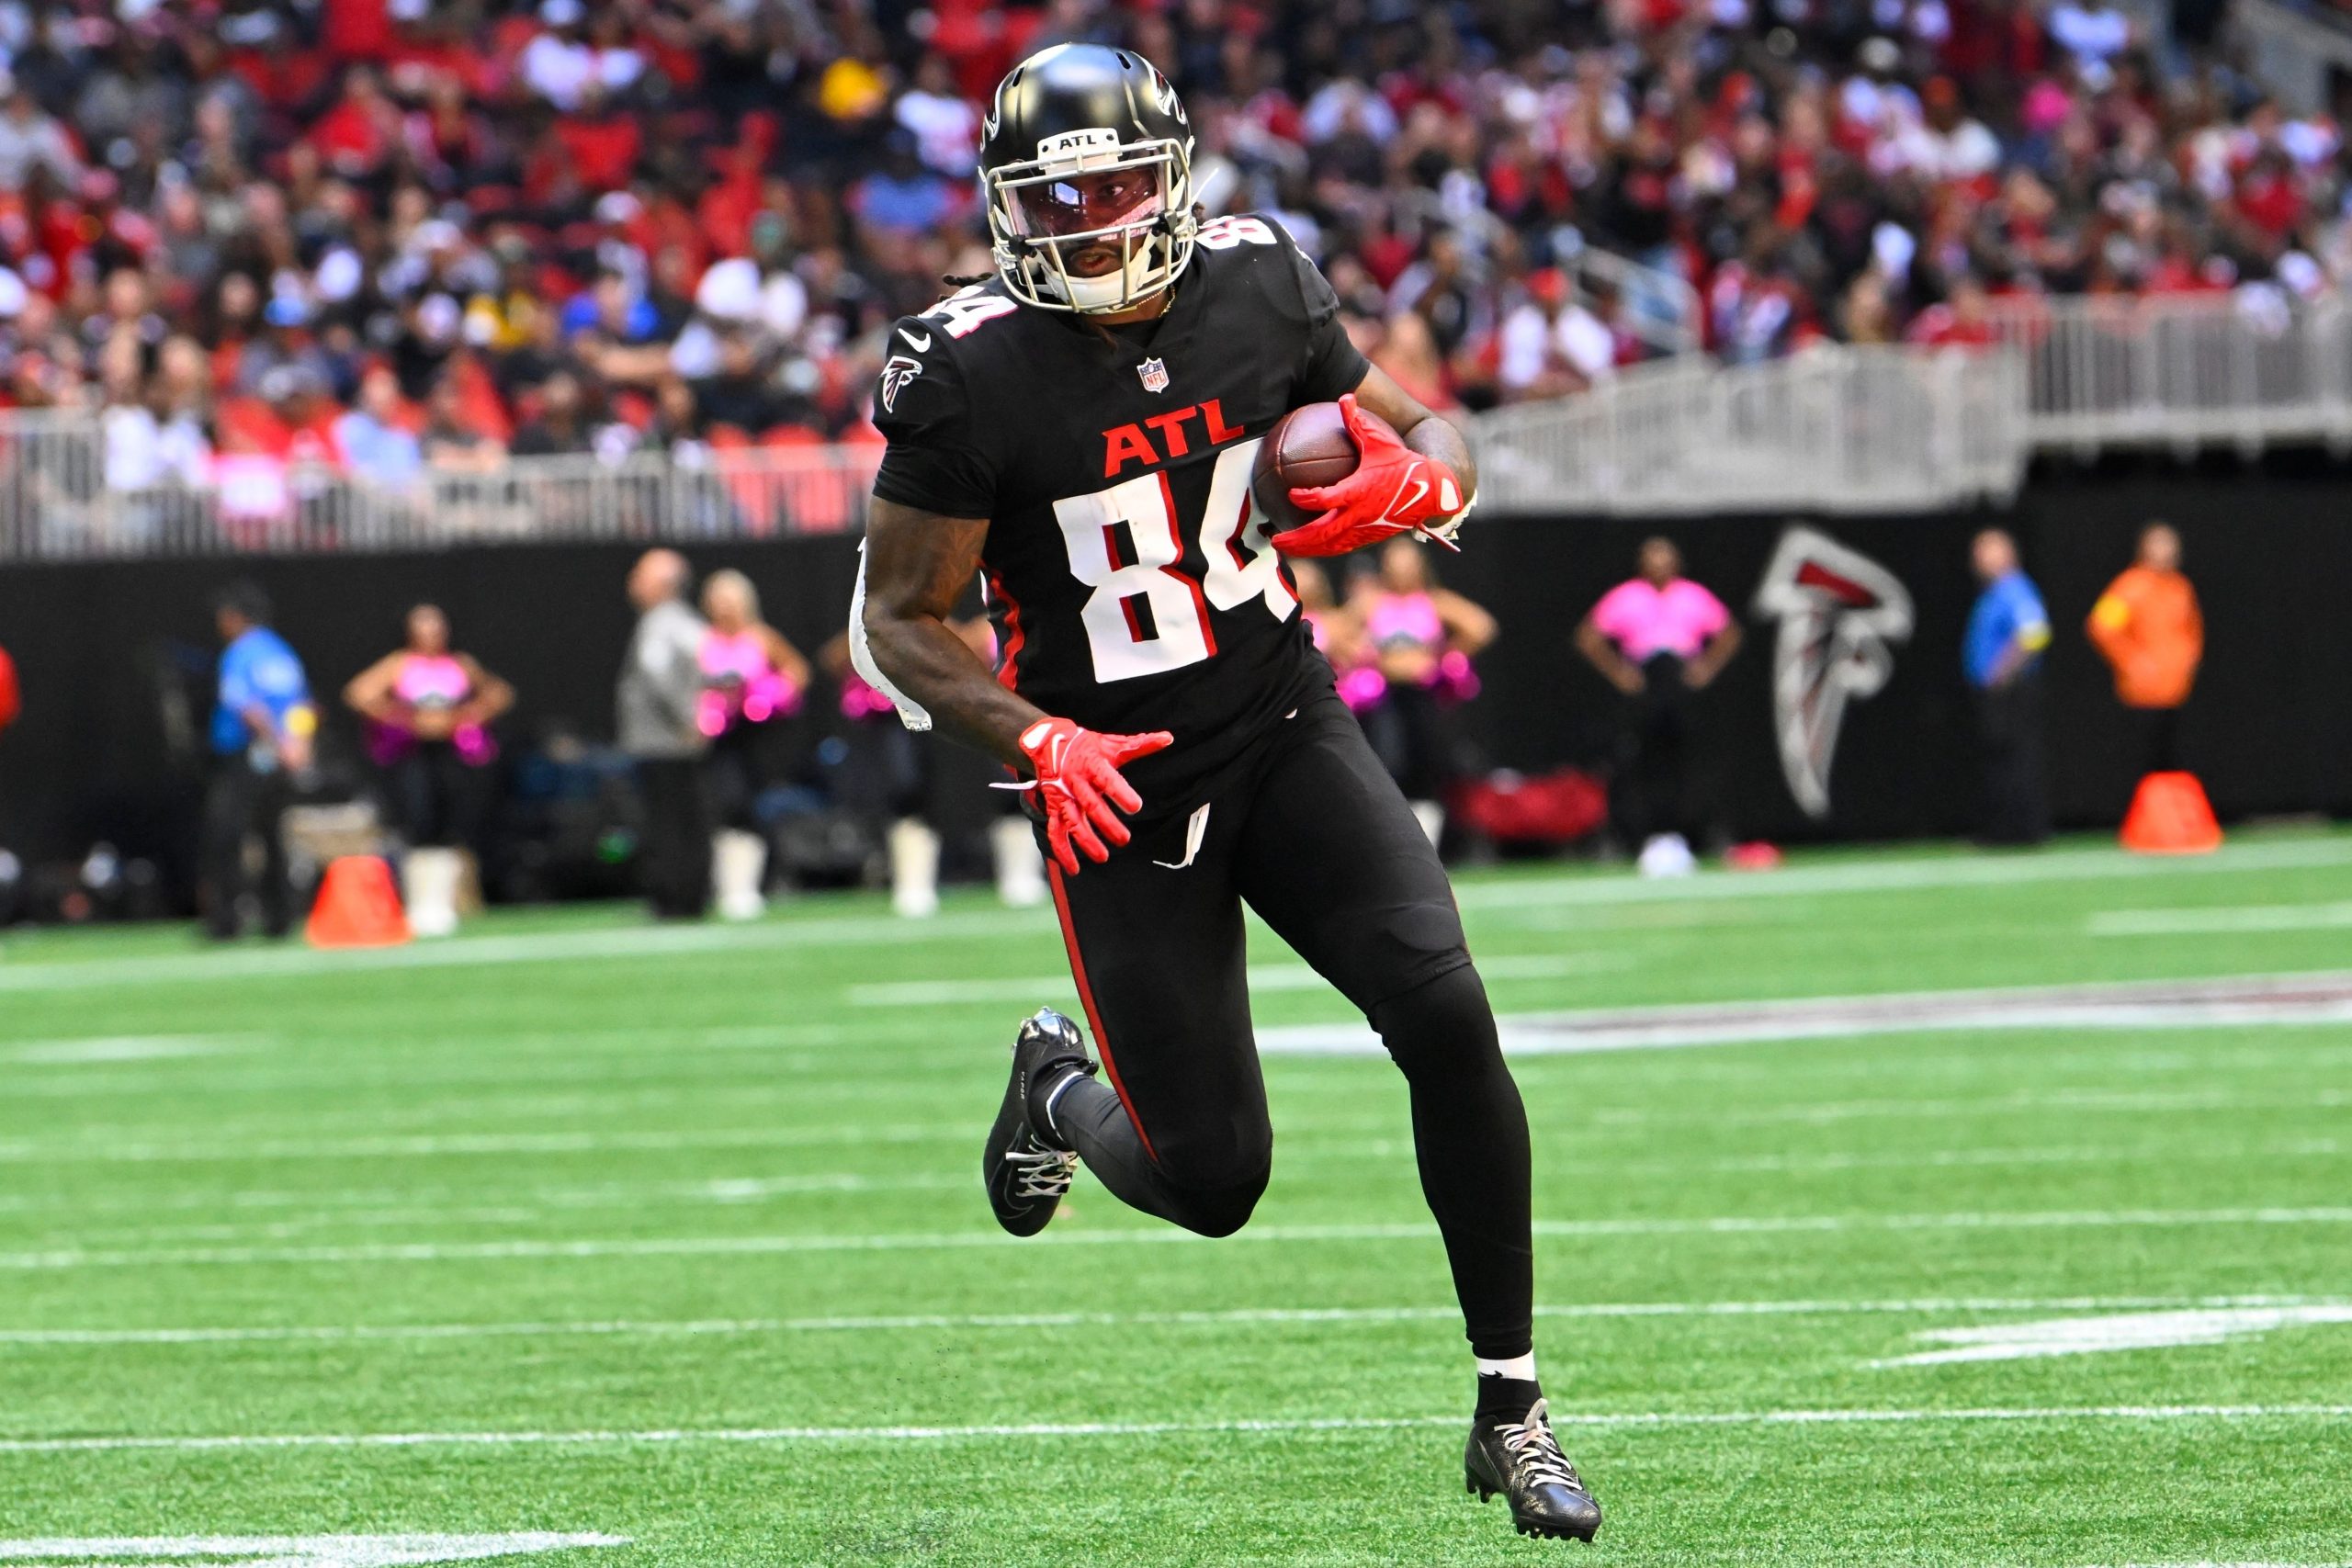 Welcome back Cordarrelle Patterson: Atlanta Falcons RB scores TD vs Los Angeles Chargers